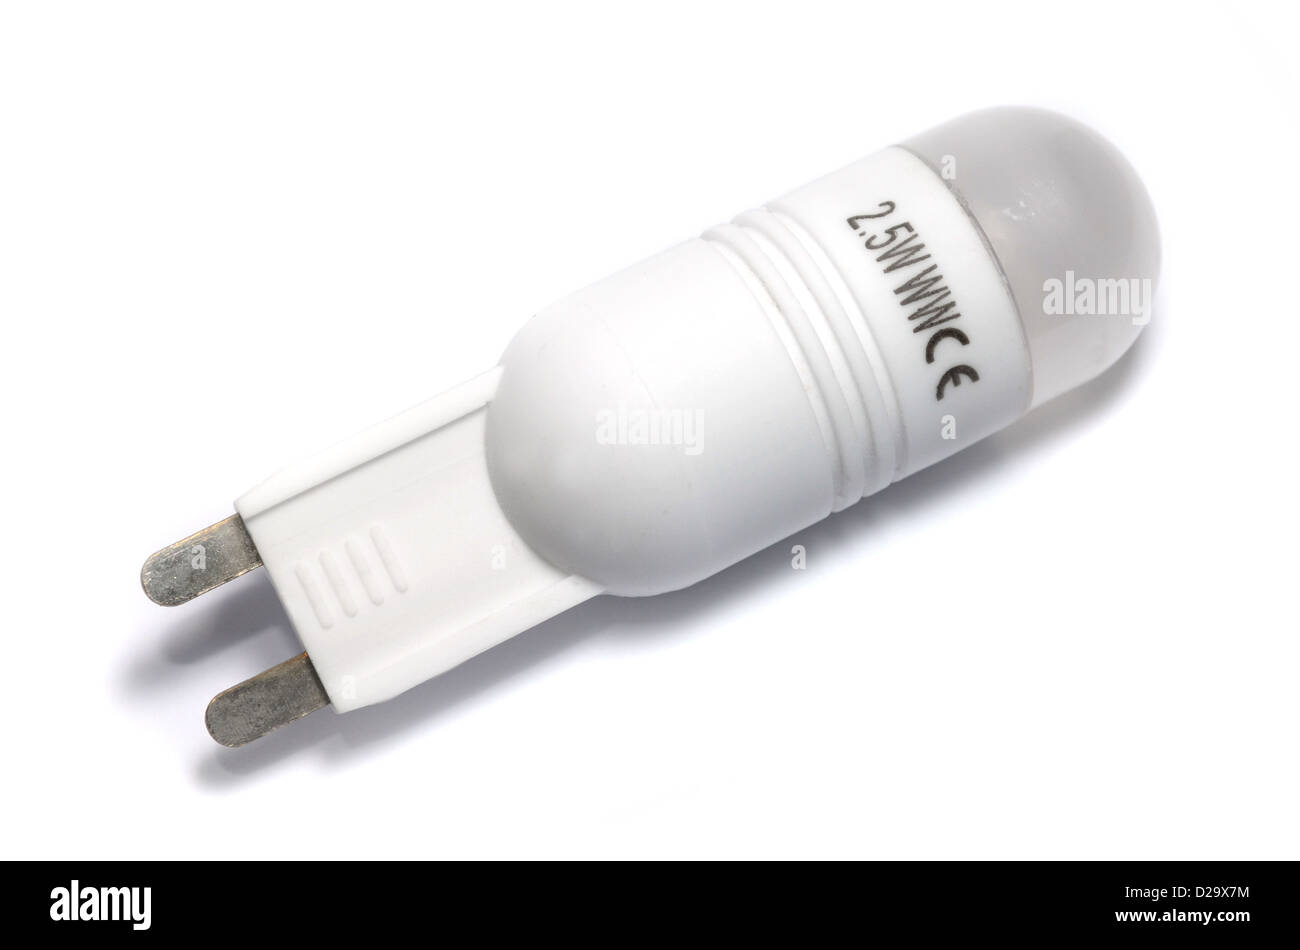 LED bulb, G9 capsule replacement. Stock Photo